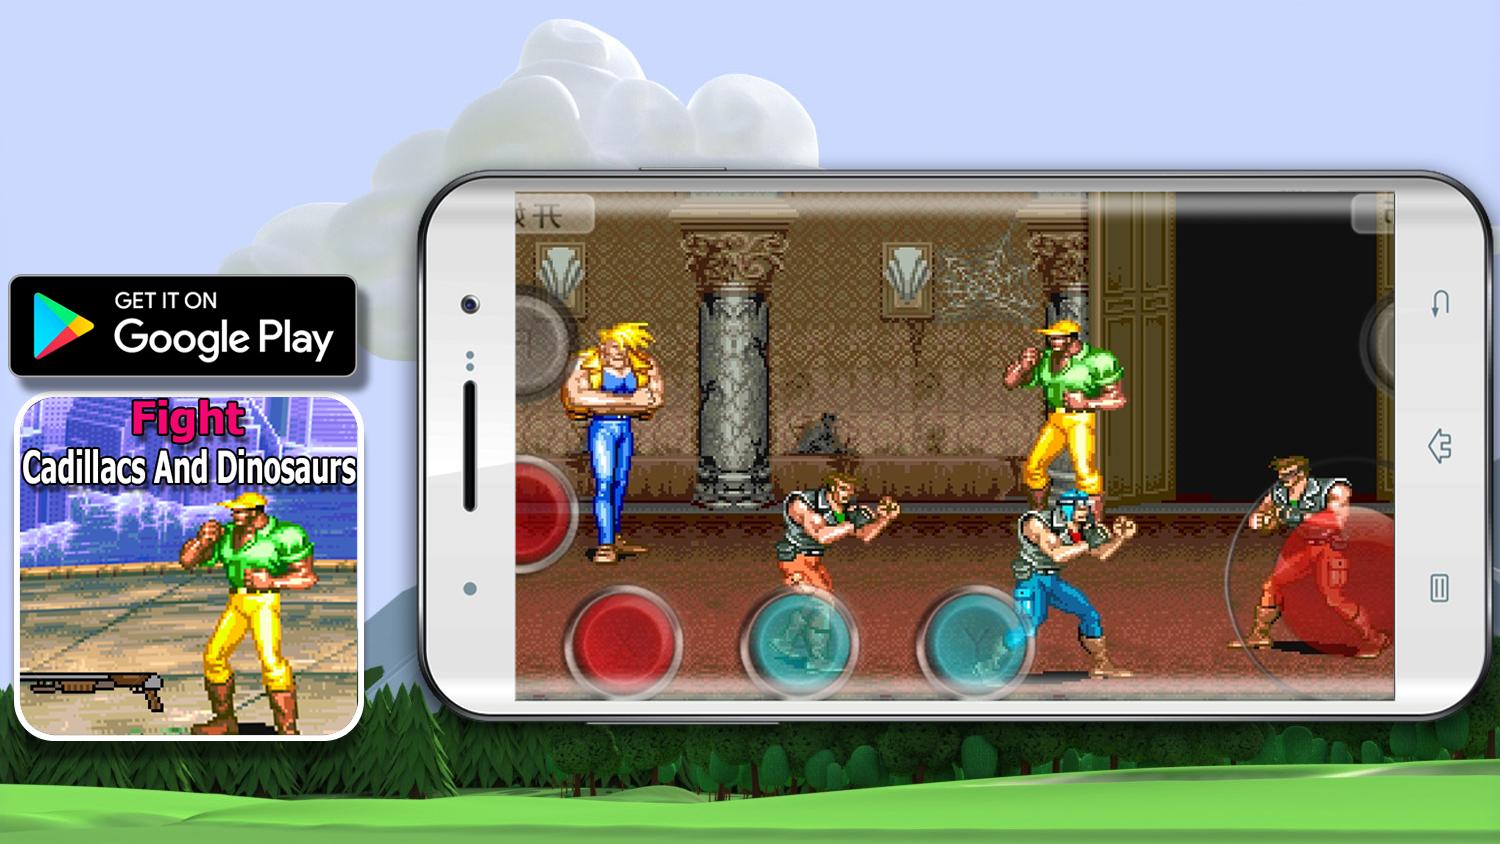 Cadillacs and dinosaurs free download for android apk and data